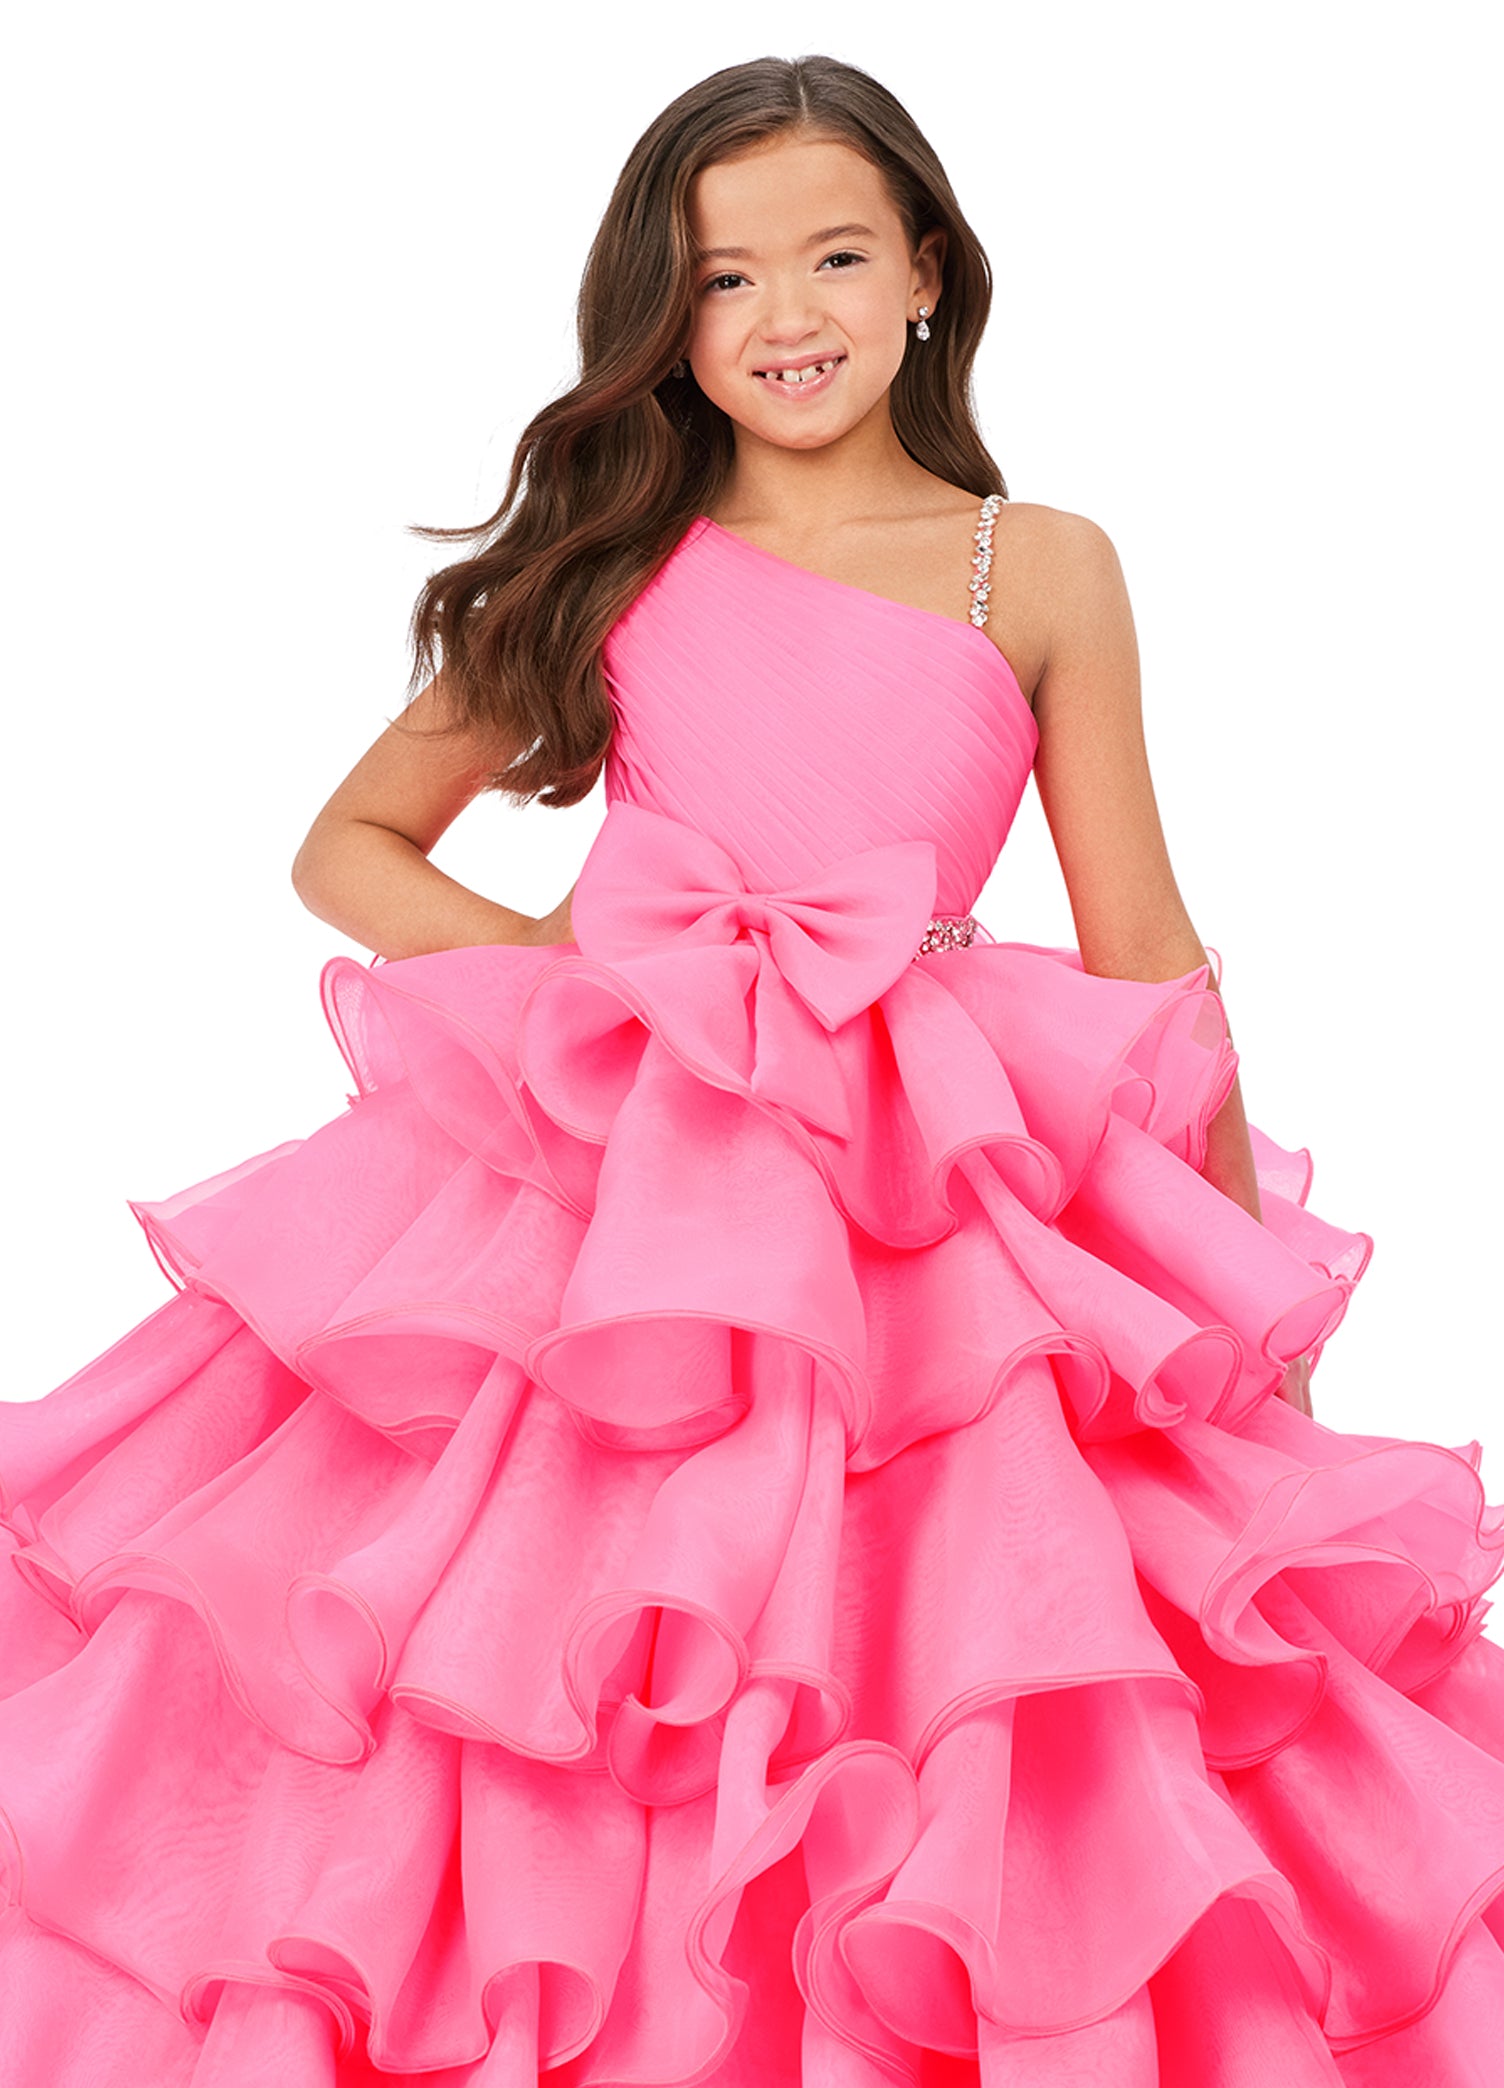 This Ashley Lauren Kids 8217 Long Ruffle Layer Girls Pageant Ballgown Bow Crystal Belt Gown is perfect for any special occasion! Elegantly crafted with an organza ball gown silhouette and one shoulder bustier, this dress also features beaded details along the waist line  and luxurious ruffles throughout the skirt. The waistband and shoulder strap are both beaded for added glam. One shoulder  Sizes: 4-16  Colors: Hot Pink, Aqua, Ivory